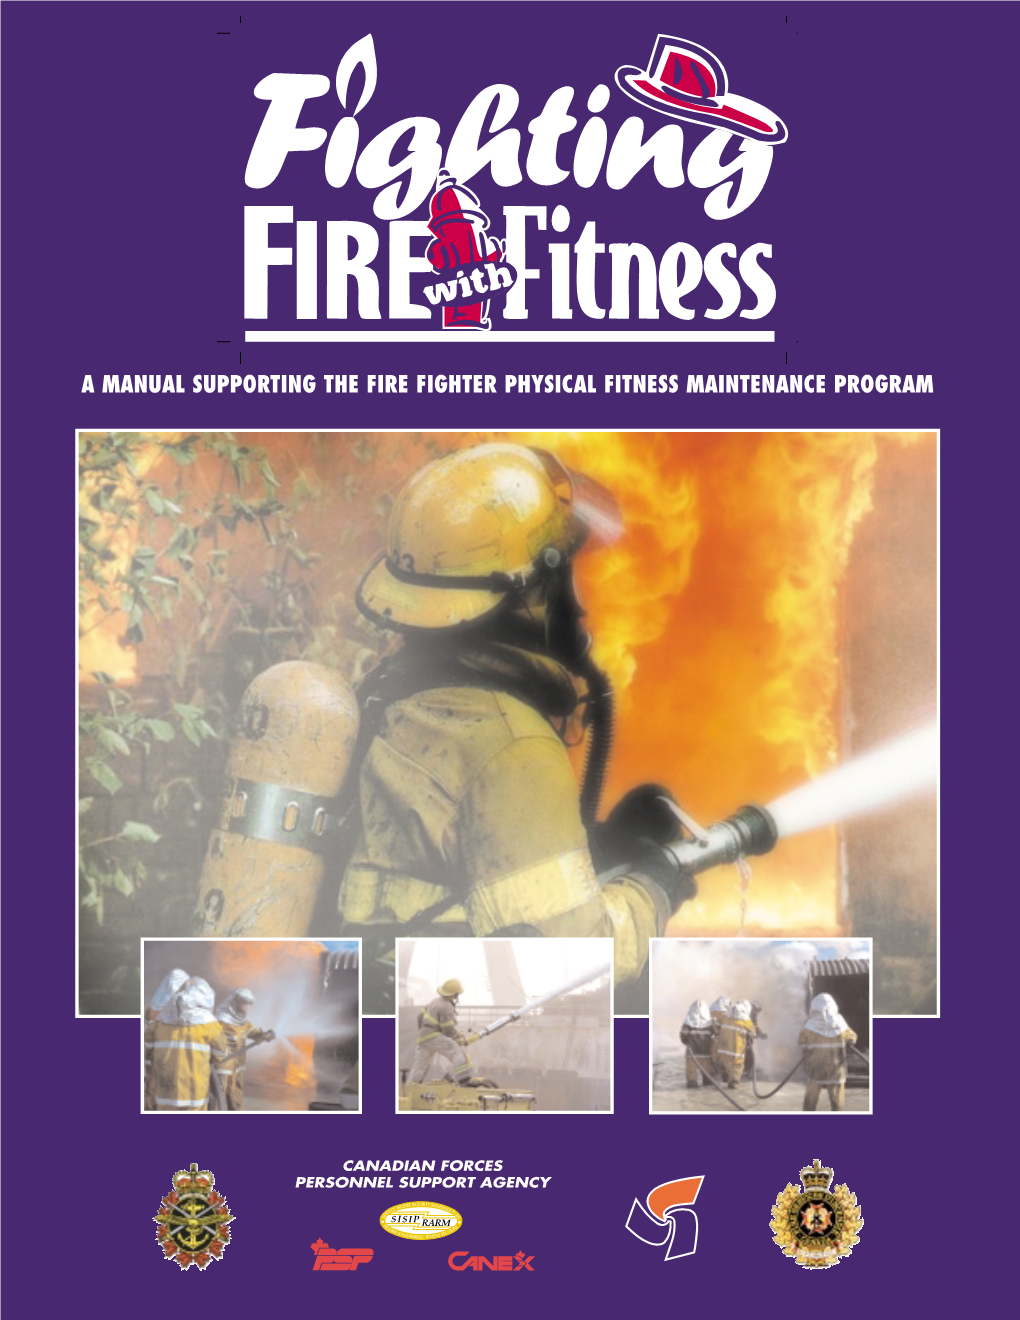 A Manual Supporting the Fire Fighter Physical Fitness Maintenance Program